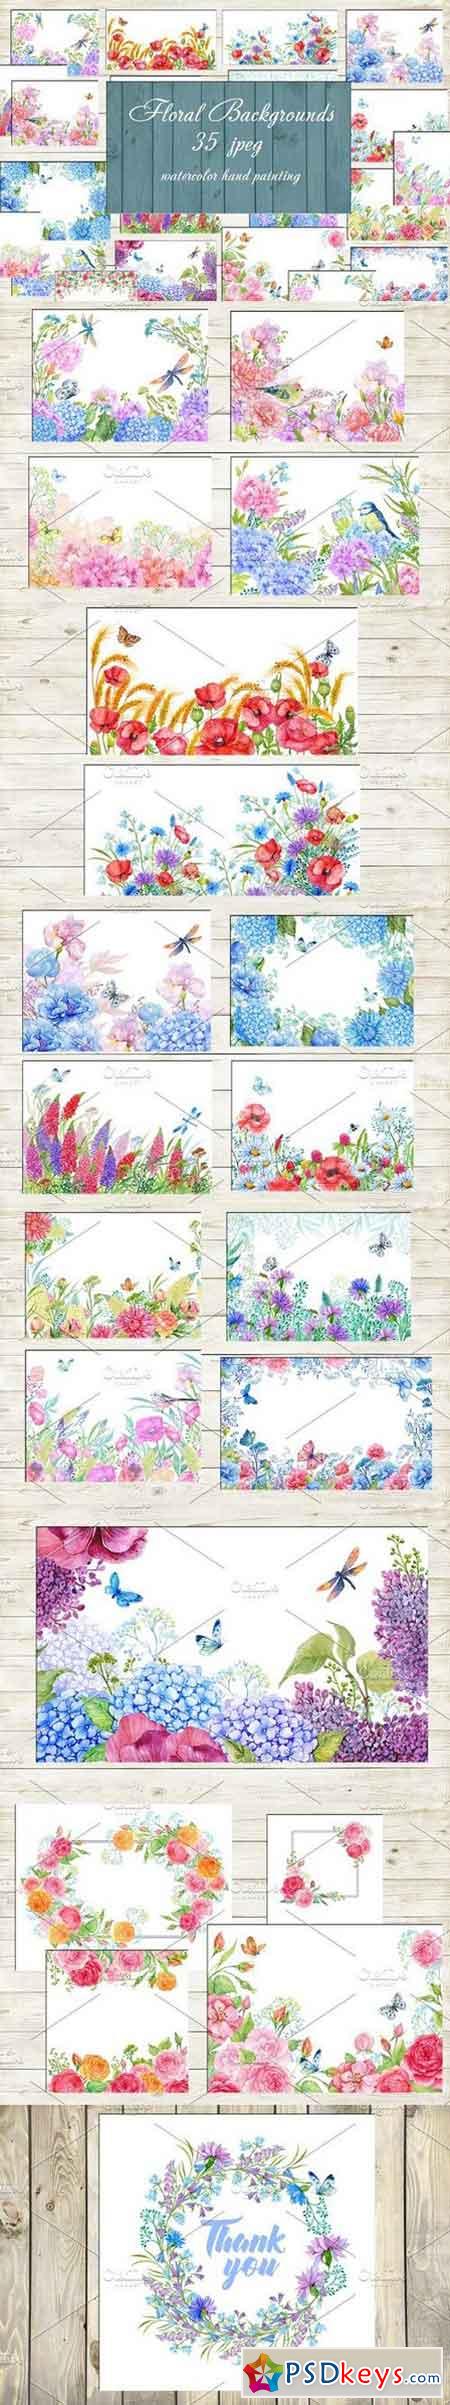 floral backgrounds watercolor 1448362